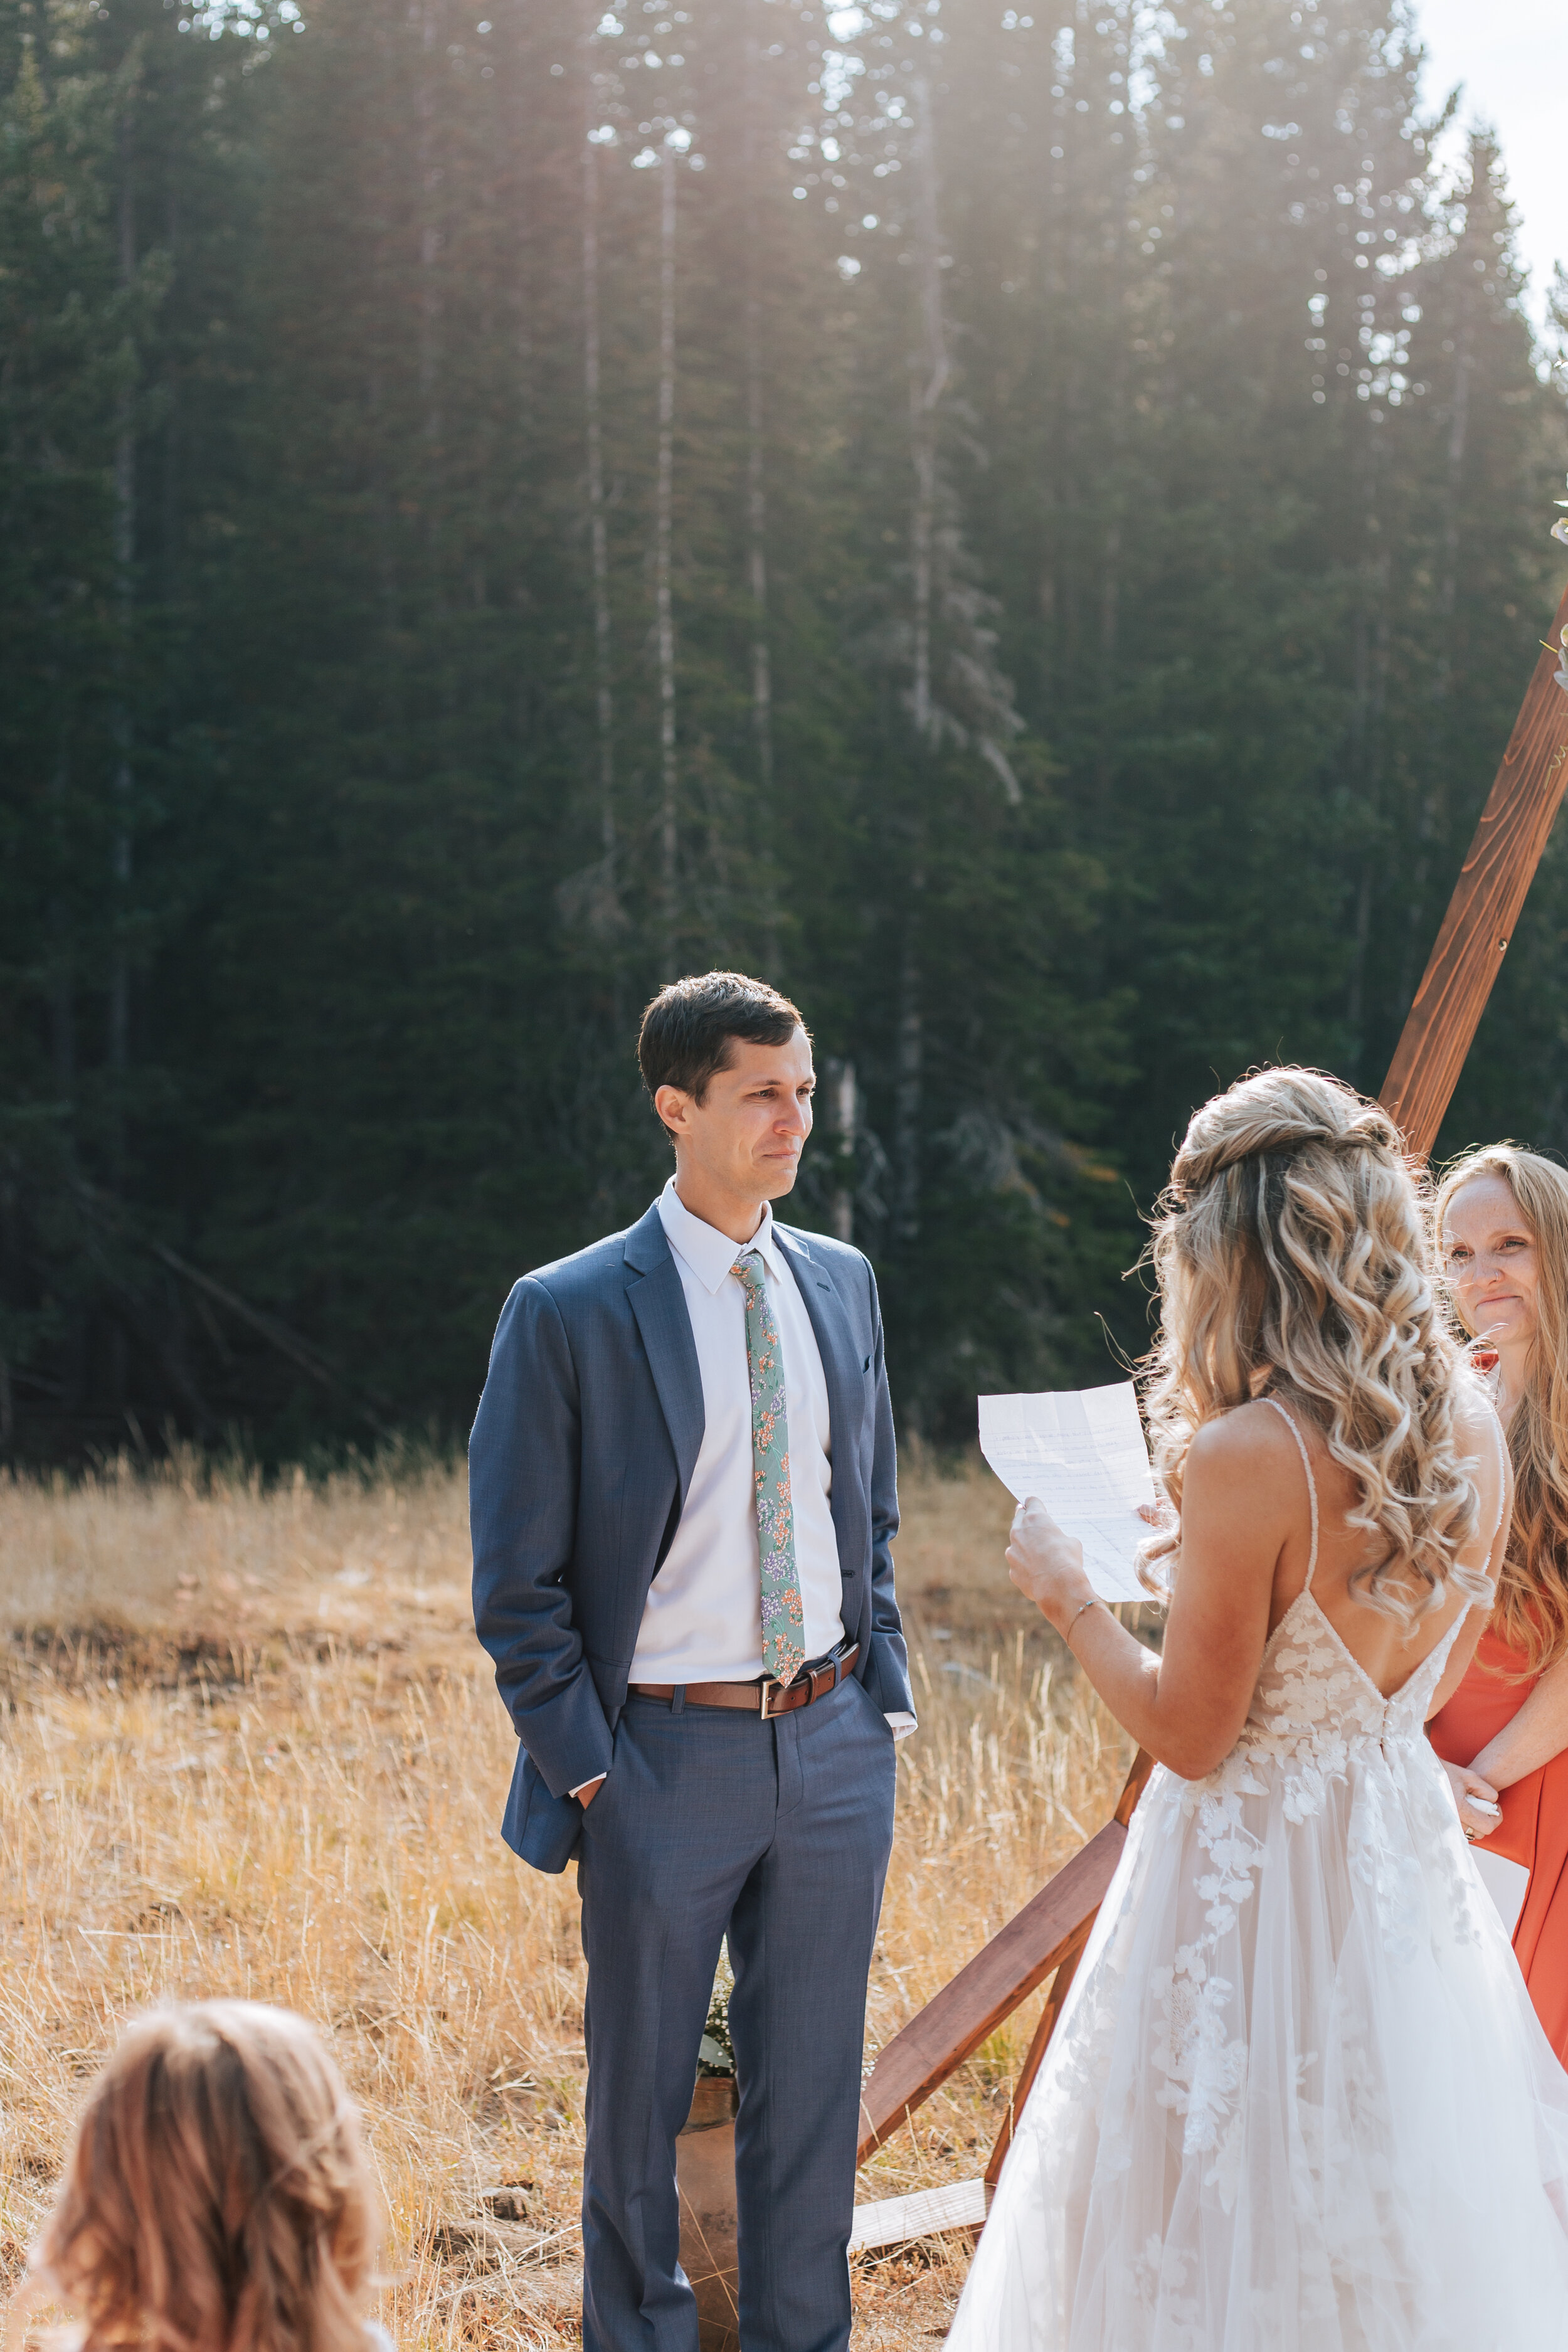  With a beautiful mountain elopement a woman reads her vows to the groom as he tears up by West Coast Elopement Photographer Emily Jenkins Photography. vow photography groom crying mountain wedding locations #emilyjenkinsphotography #emilyjenkinselop